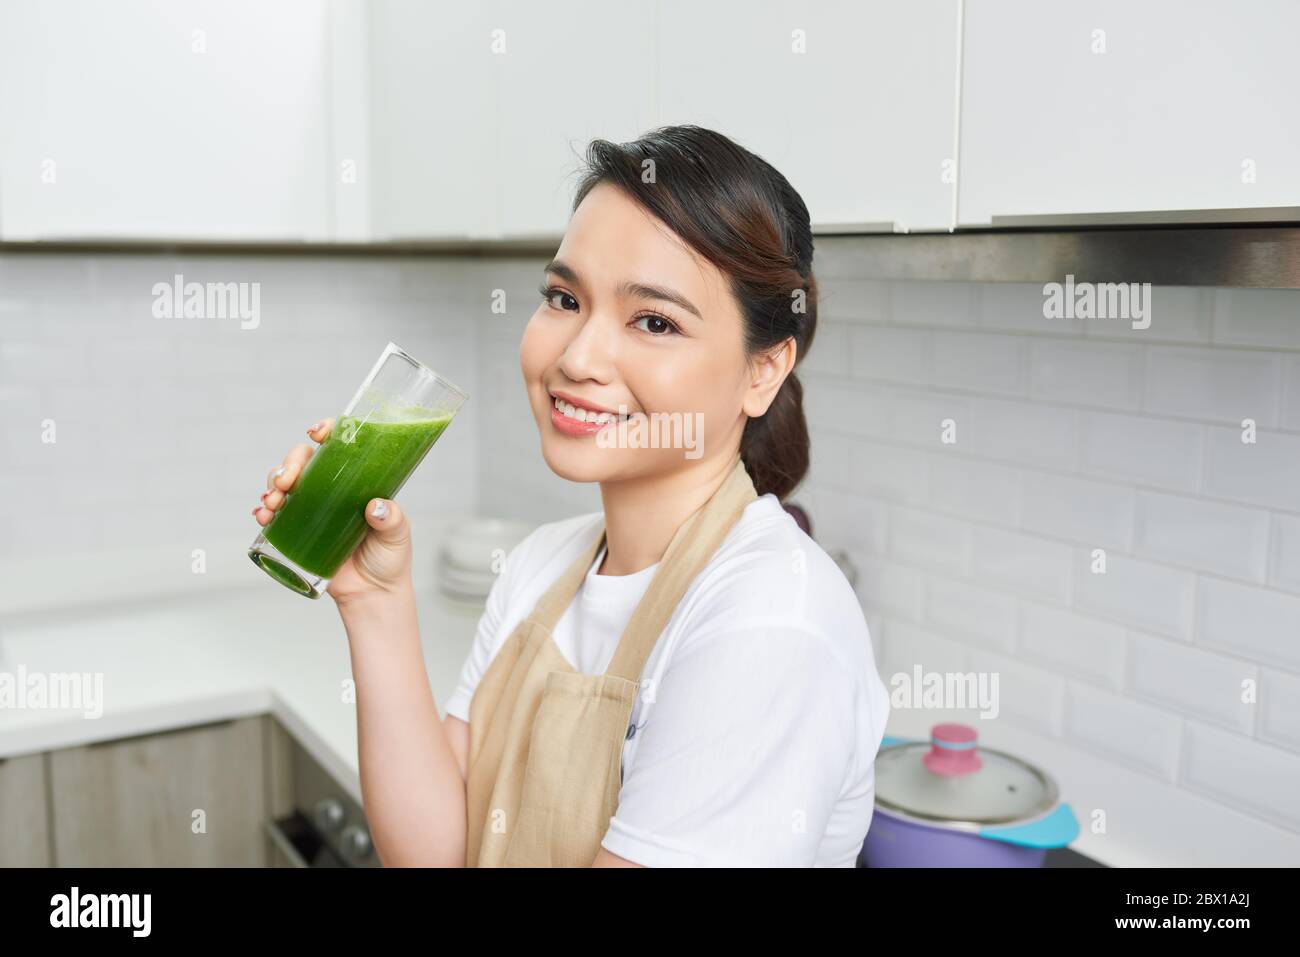 Detox Concept. Close up portrait of asian girl holding glass with homemade green juice, looking aside at free space Stock Photo